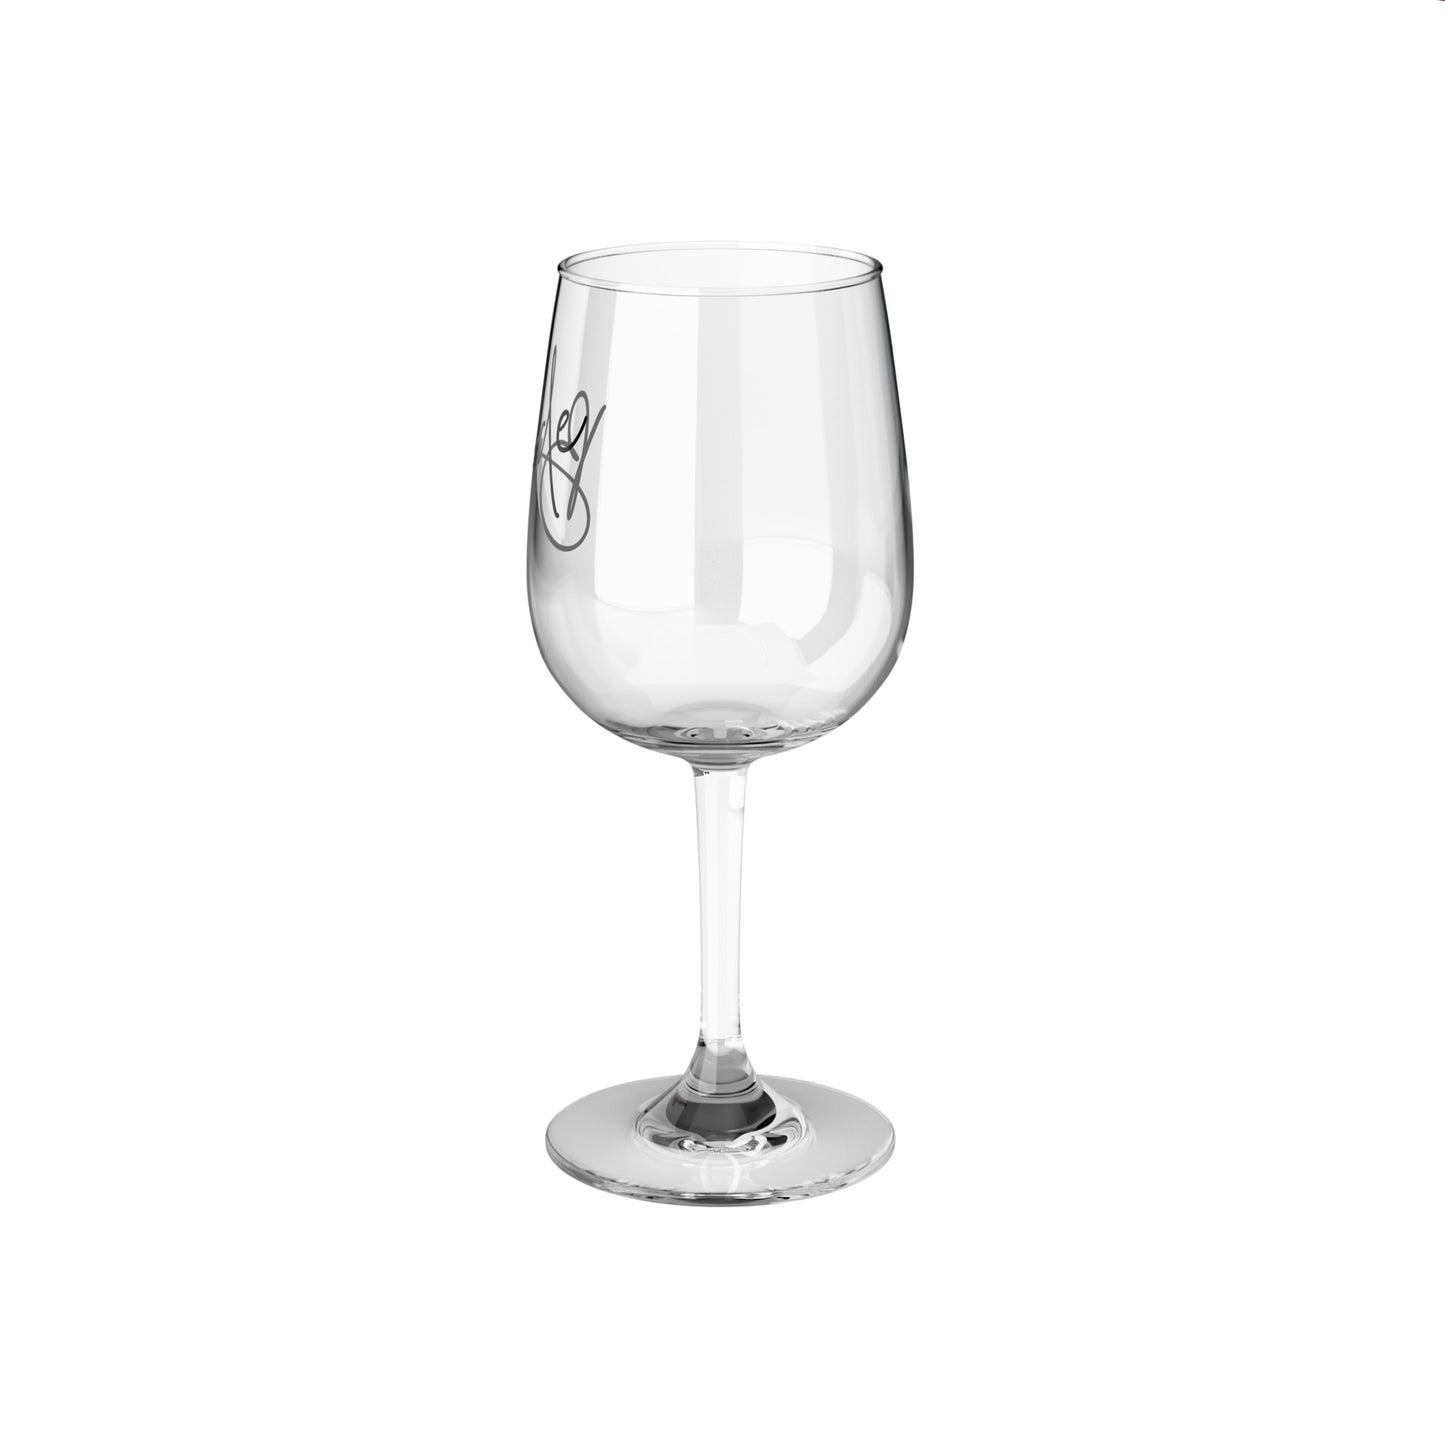 Wedding or bridal shower wine glass for bride, side view.